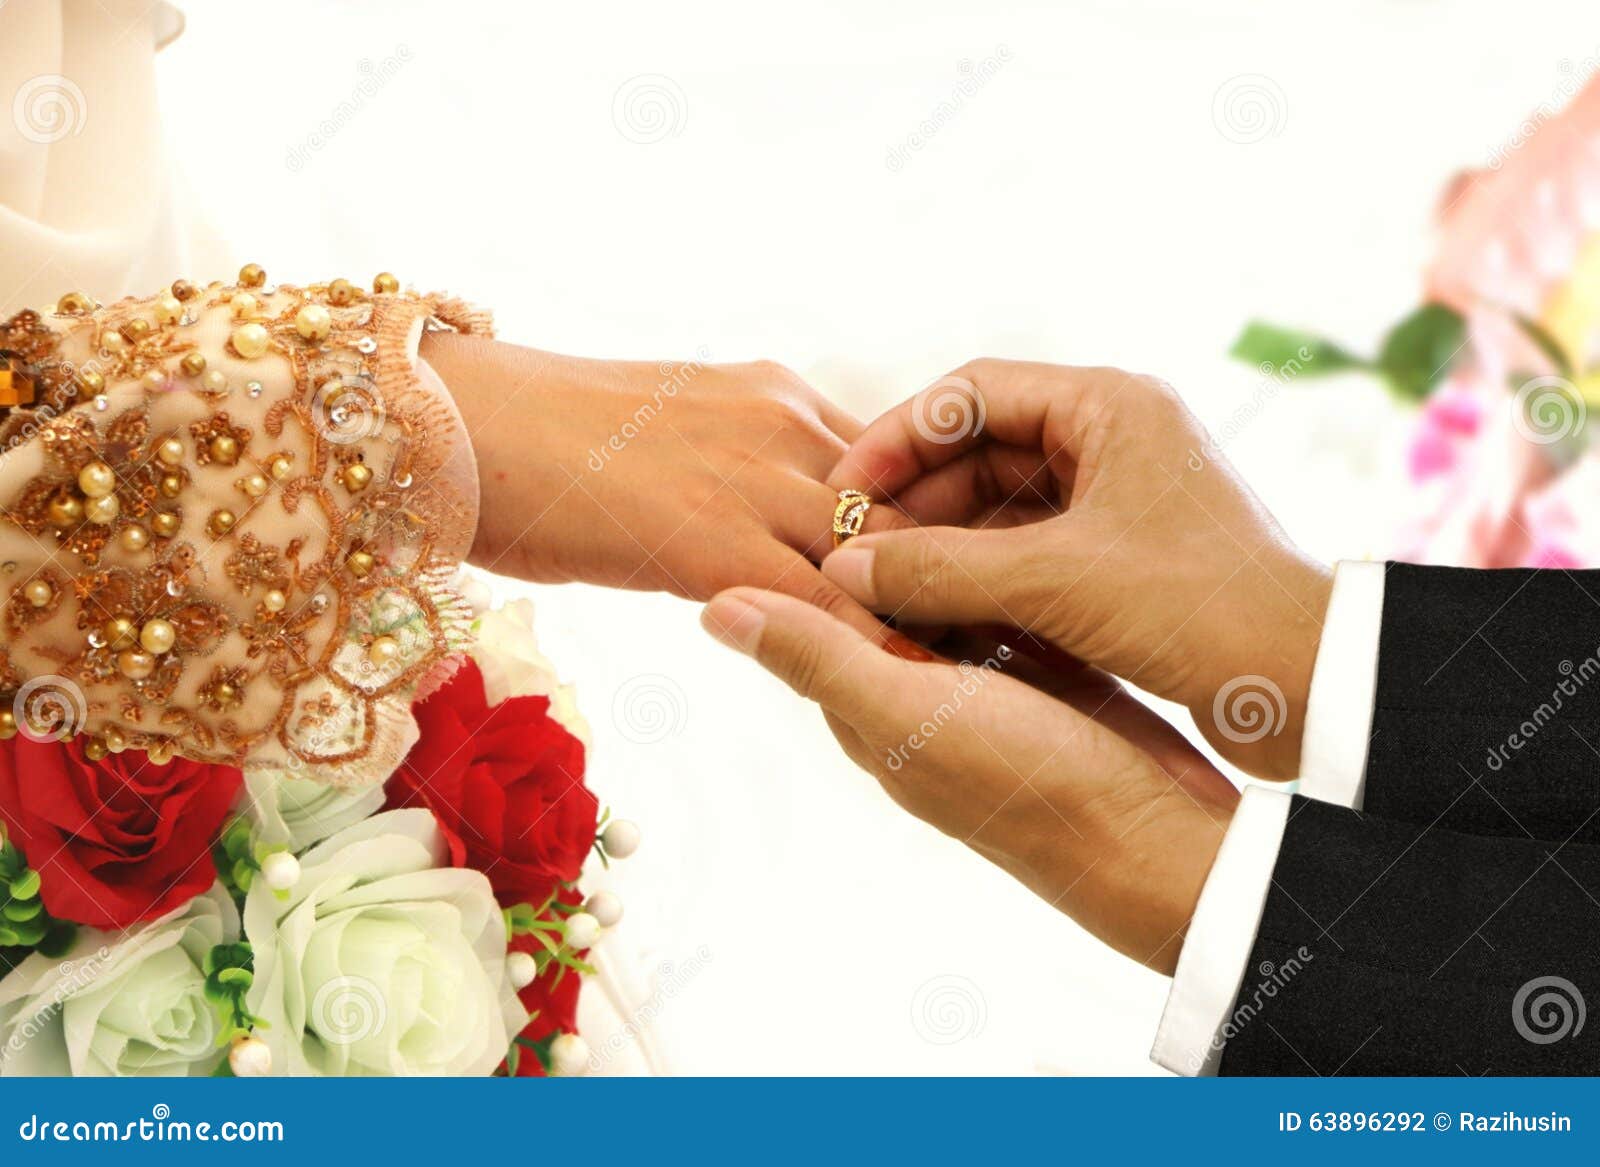 Bride and groom at church wedding ceremony Stock Photo by ©wideonet  311116162